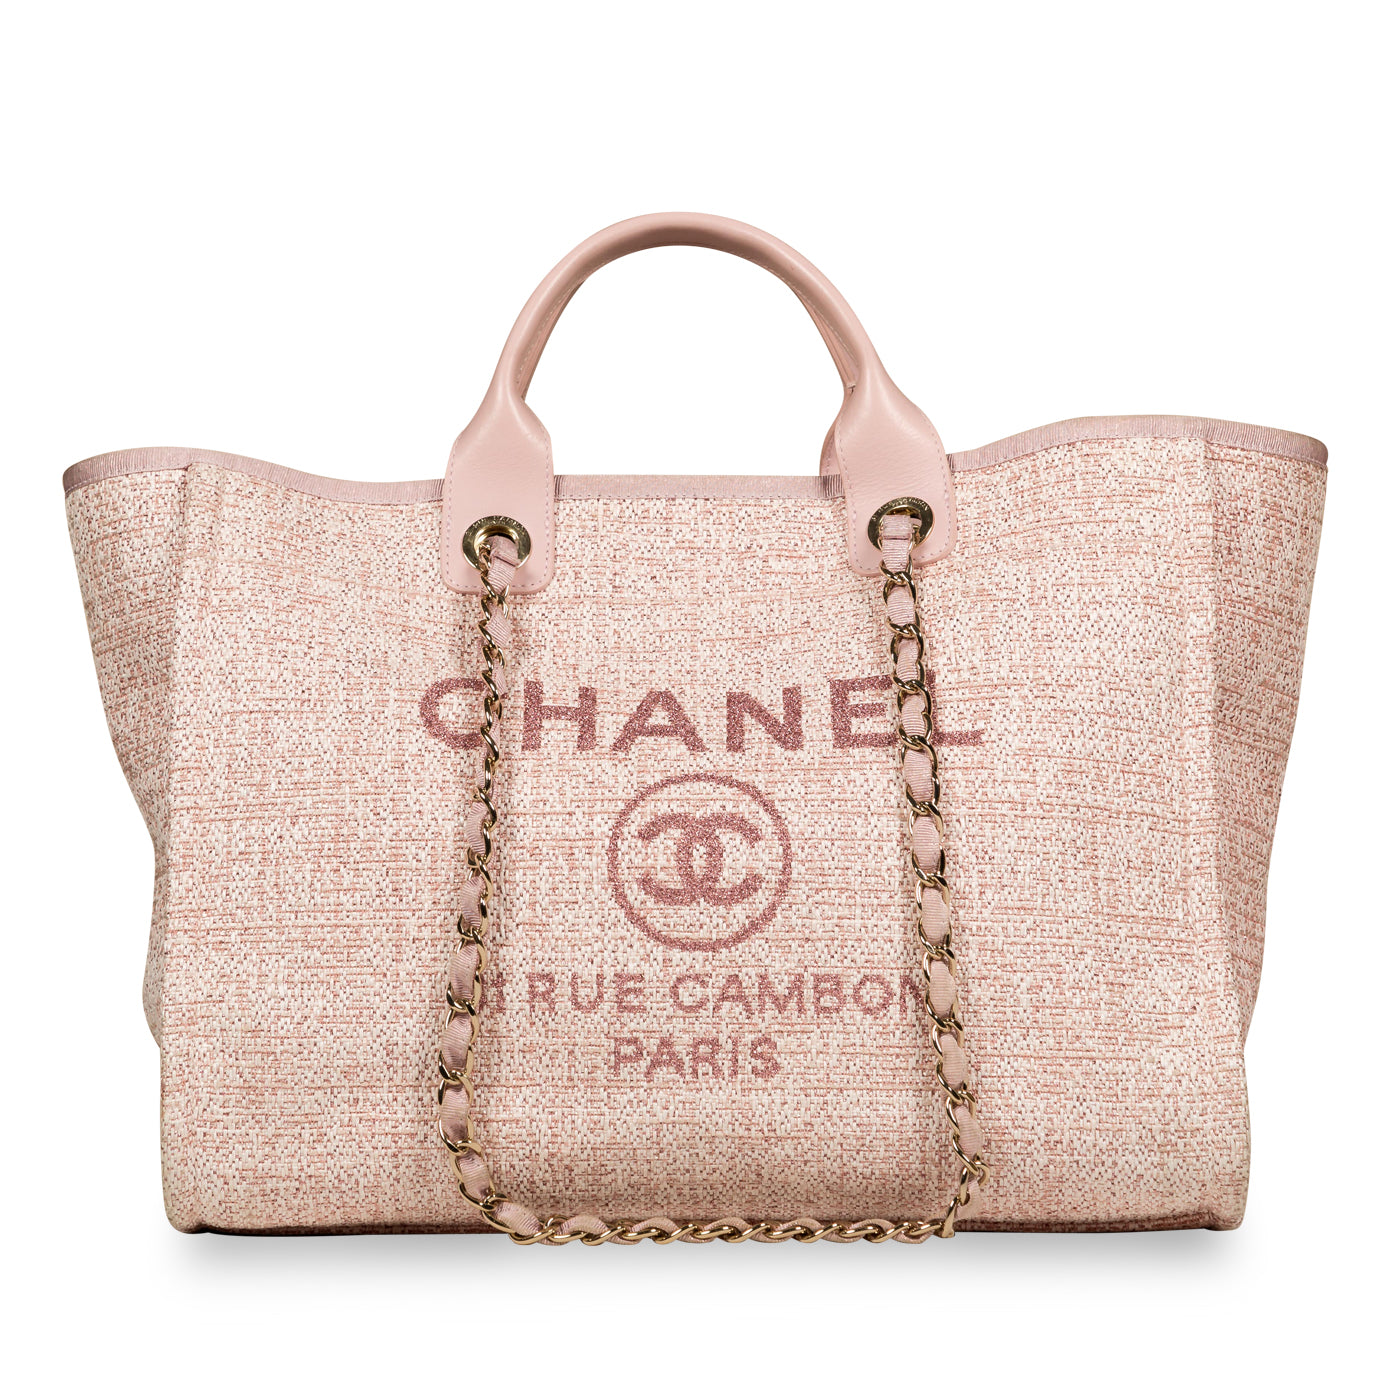 I took the Chanel Deauville tote to Hawaii with me and it was the